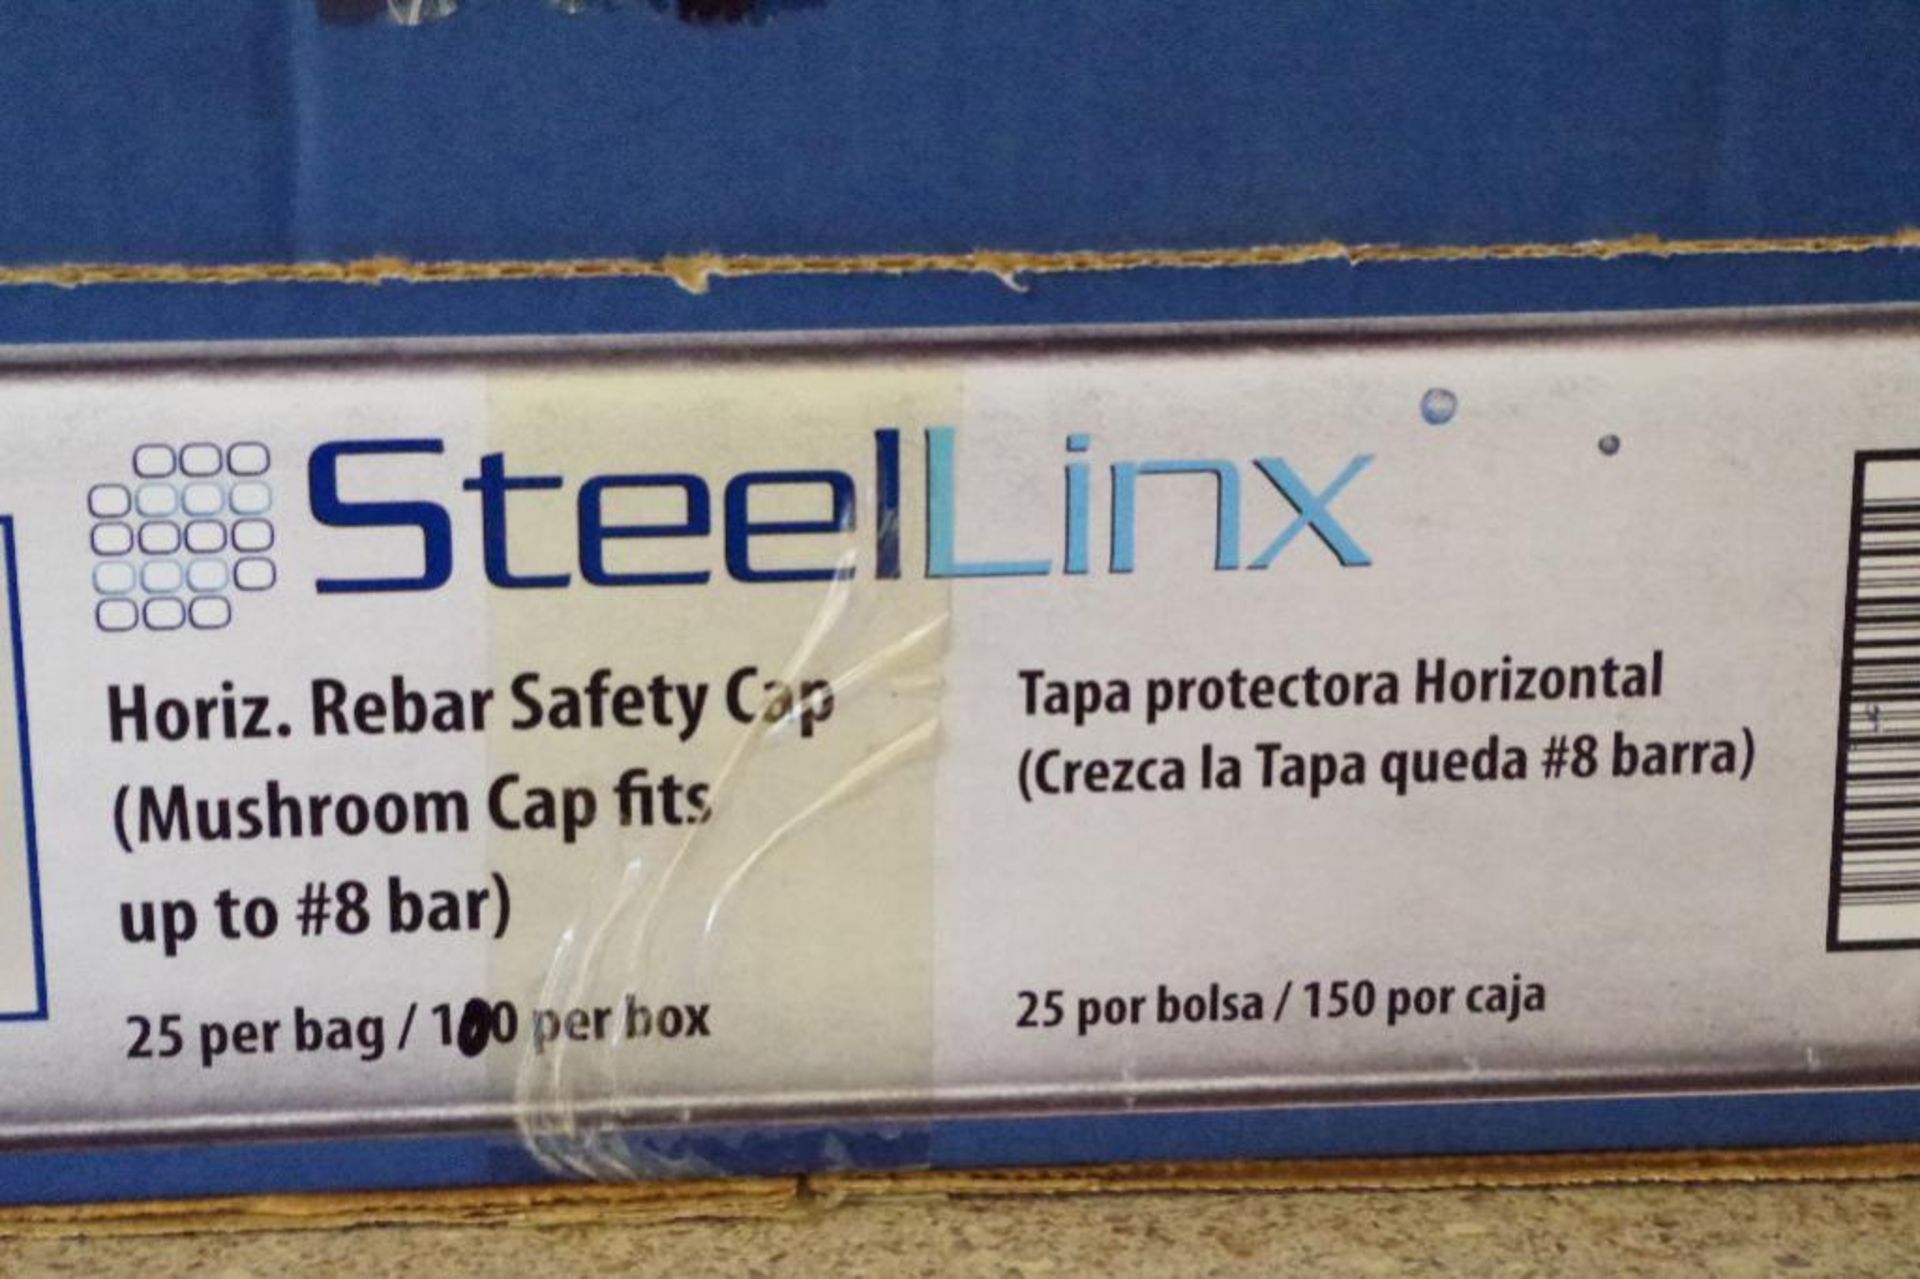 (100) NEW STEELLINX Horizontal Rebar Safety Caps (4 bags of 25) - Image 2 of 3